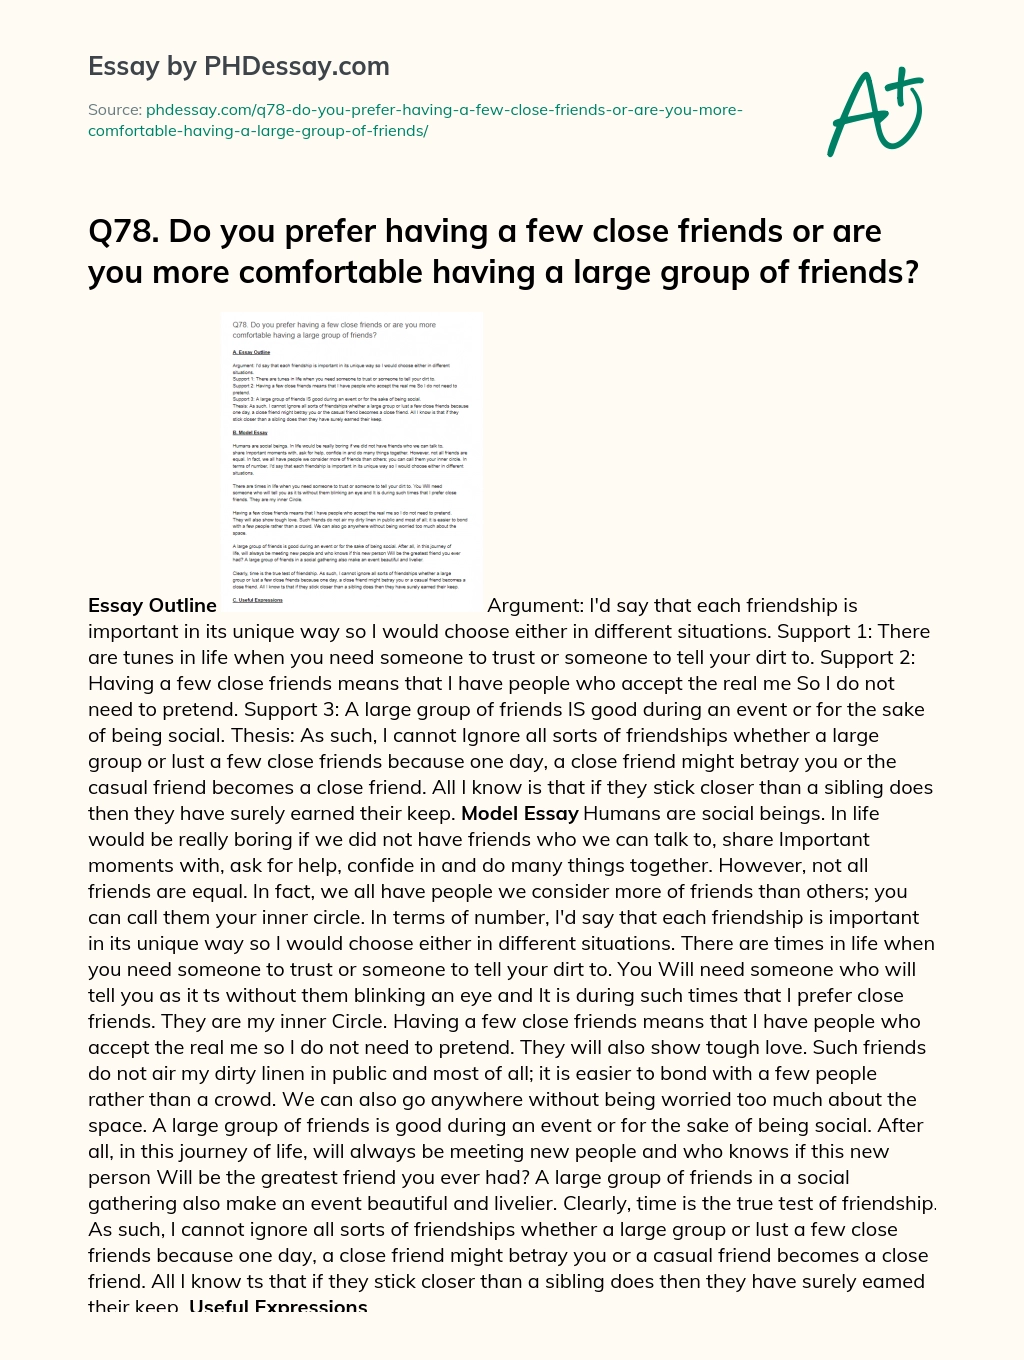 Q78. Do you prefer having a few close friends or are you more comfortable having a large group of friends? essay